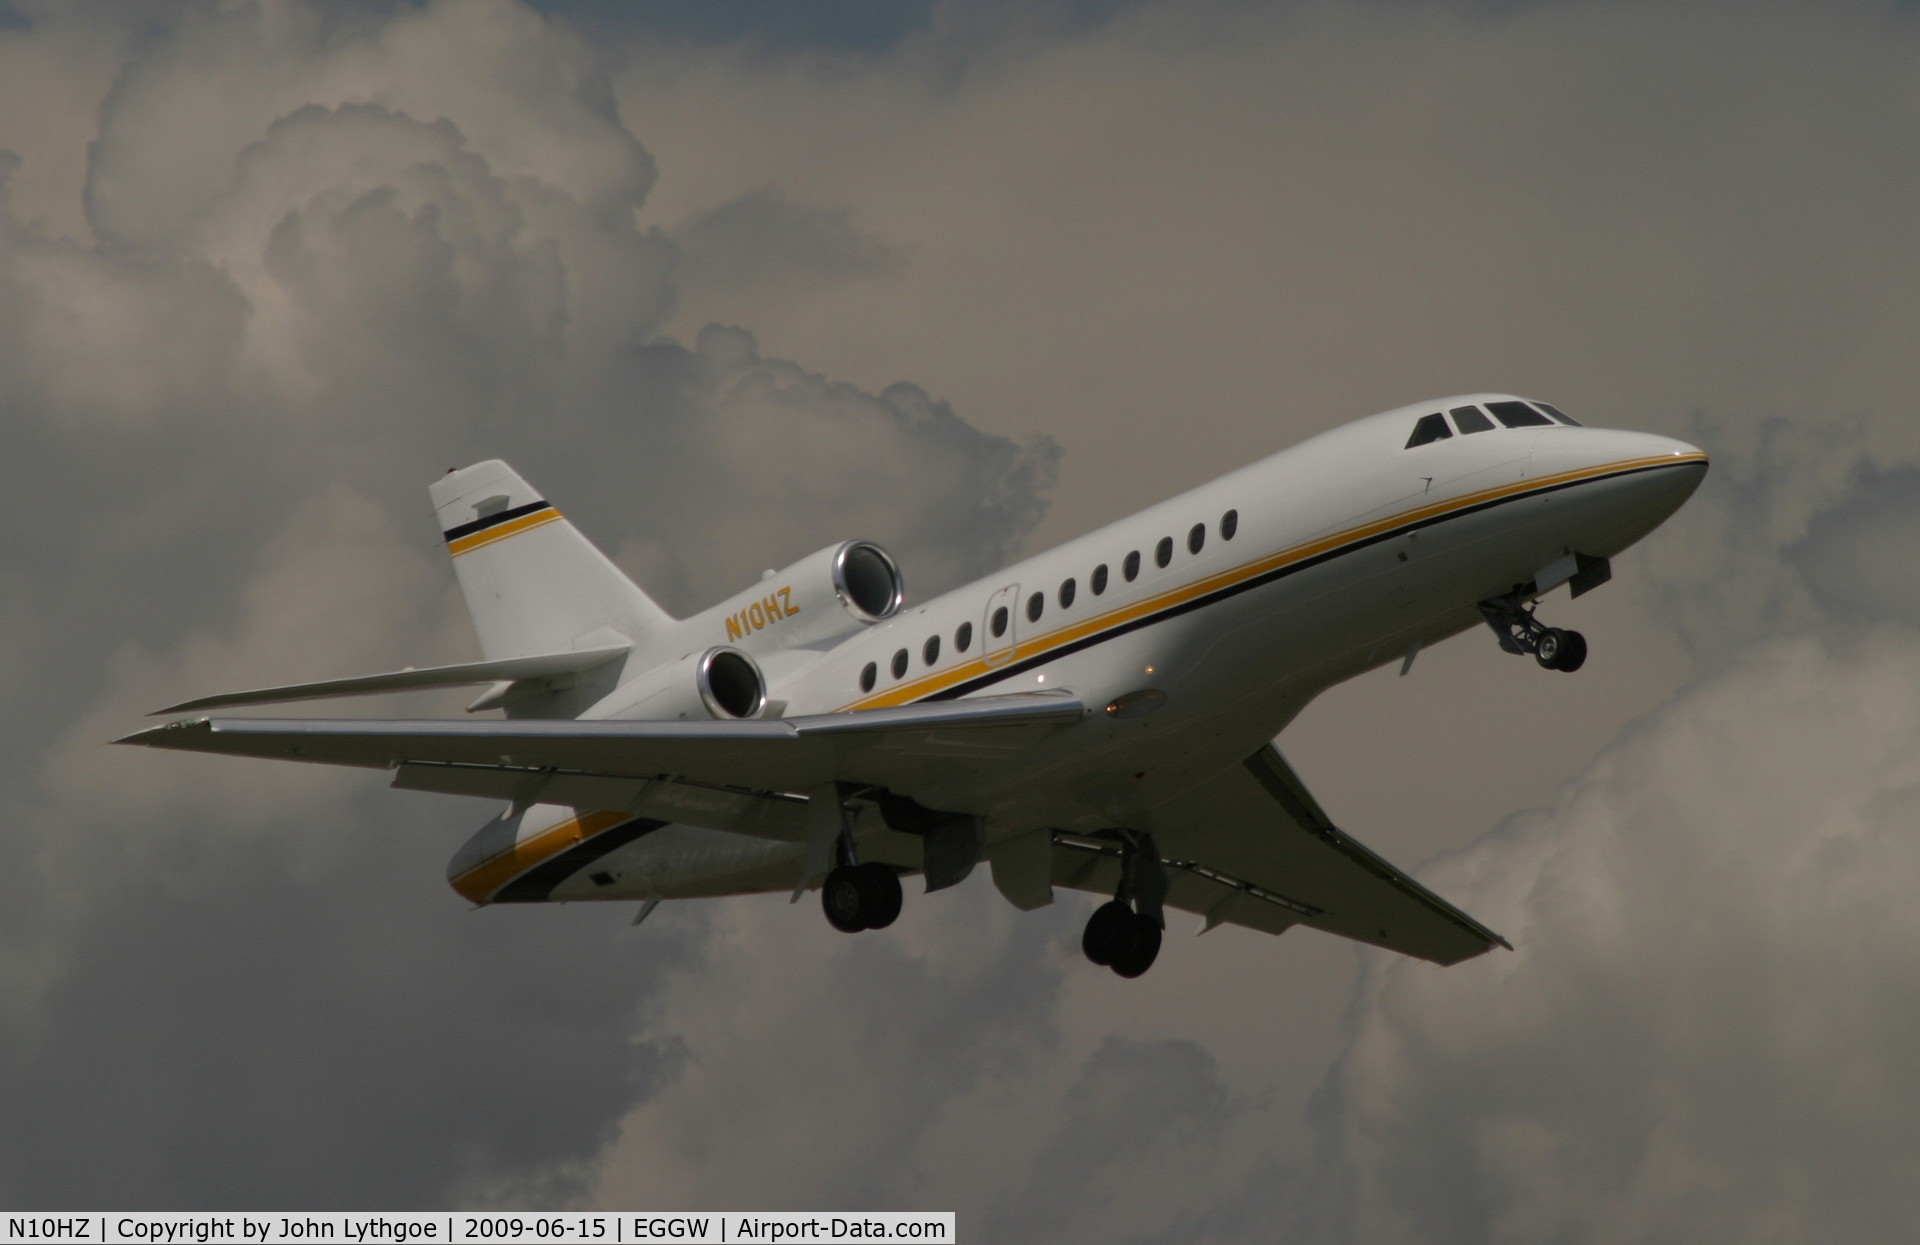 N10HZ, 1999 Dassault Falcon 900EX C/N 57, Departing EGGW on a typical English June day.